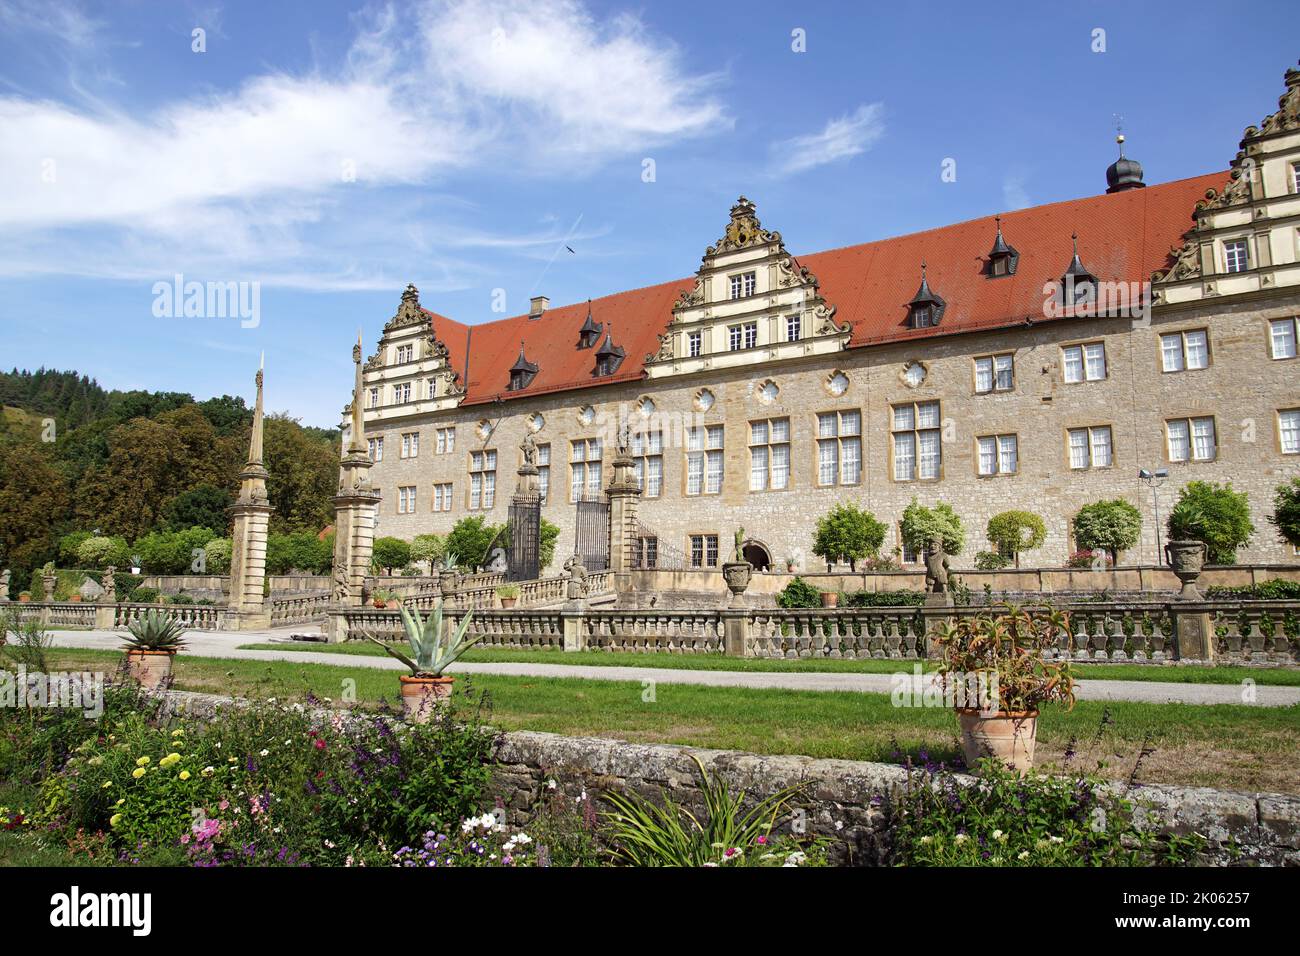 View on Castle from the castle garden Weikersheim. In Renaissance style. Summer, August, Germany. Stock Photo